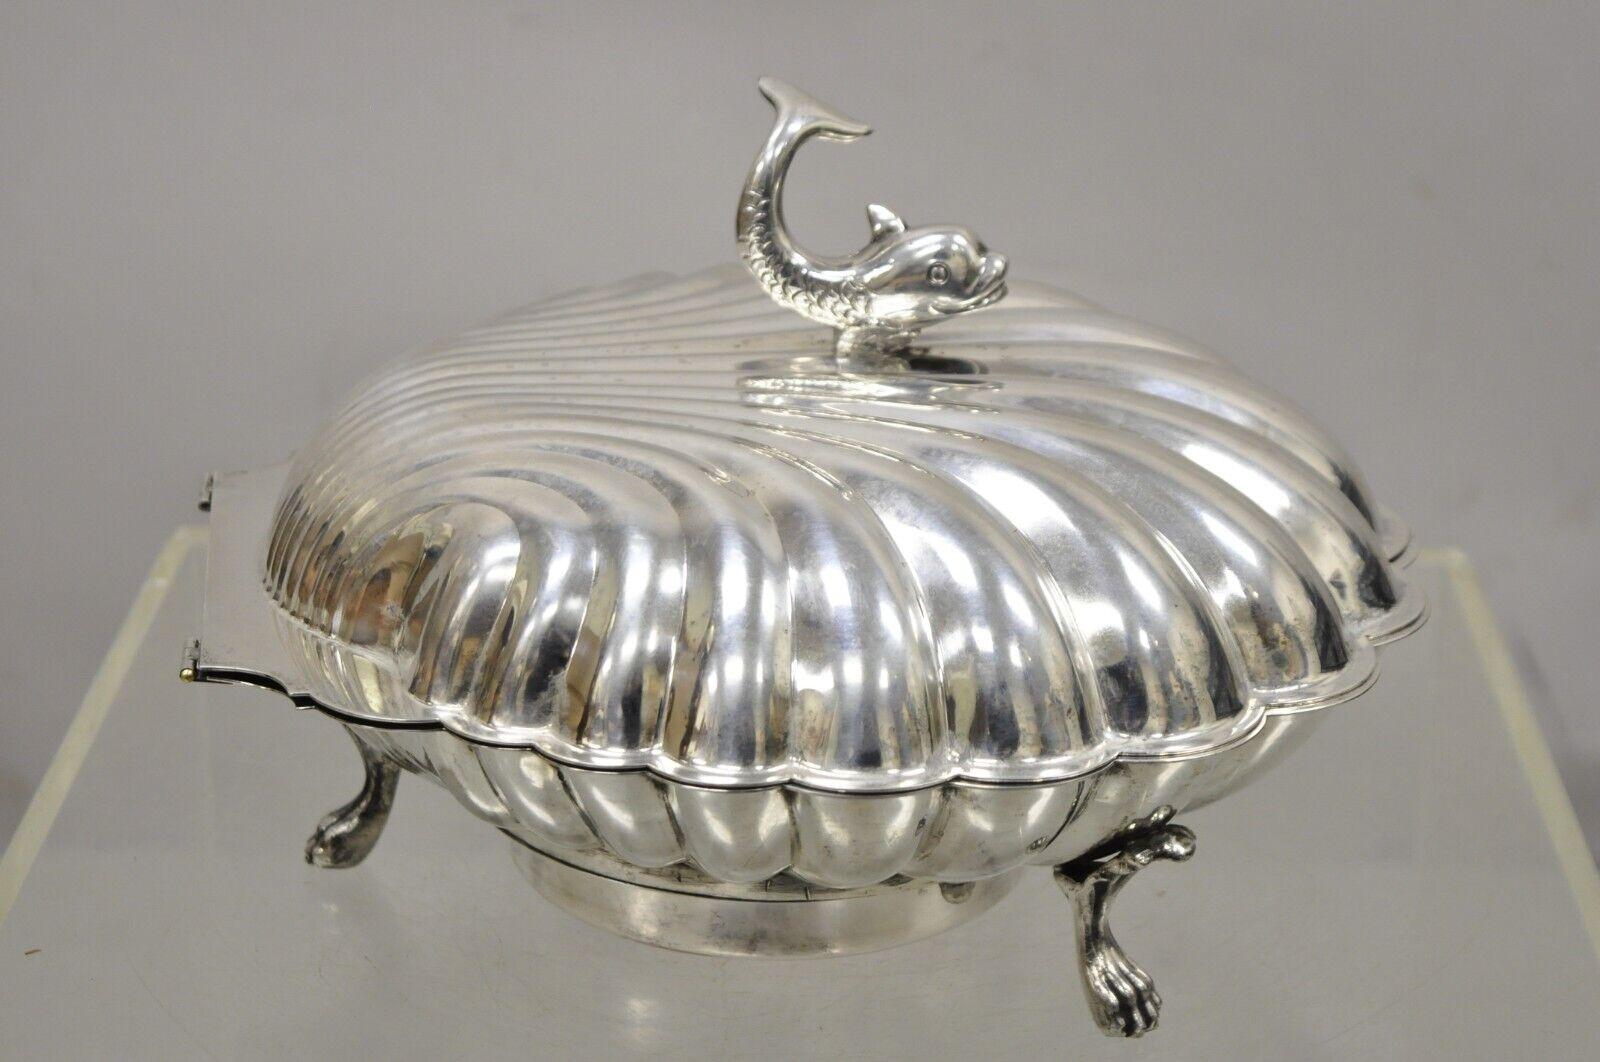 Vintage Eton Dolphin Handle Clam shell silver plate Electrified Bun Warmer. Item featured is raised on 3 paw feet, smiling dolphin finial handle, hinged clam shell lid, electric plug for warmer, original stamp, great style and form. Circa Mid 20th